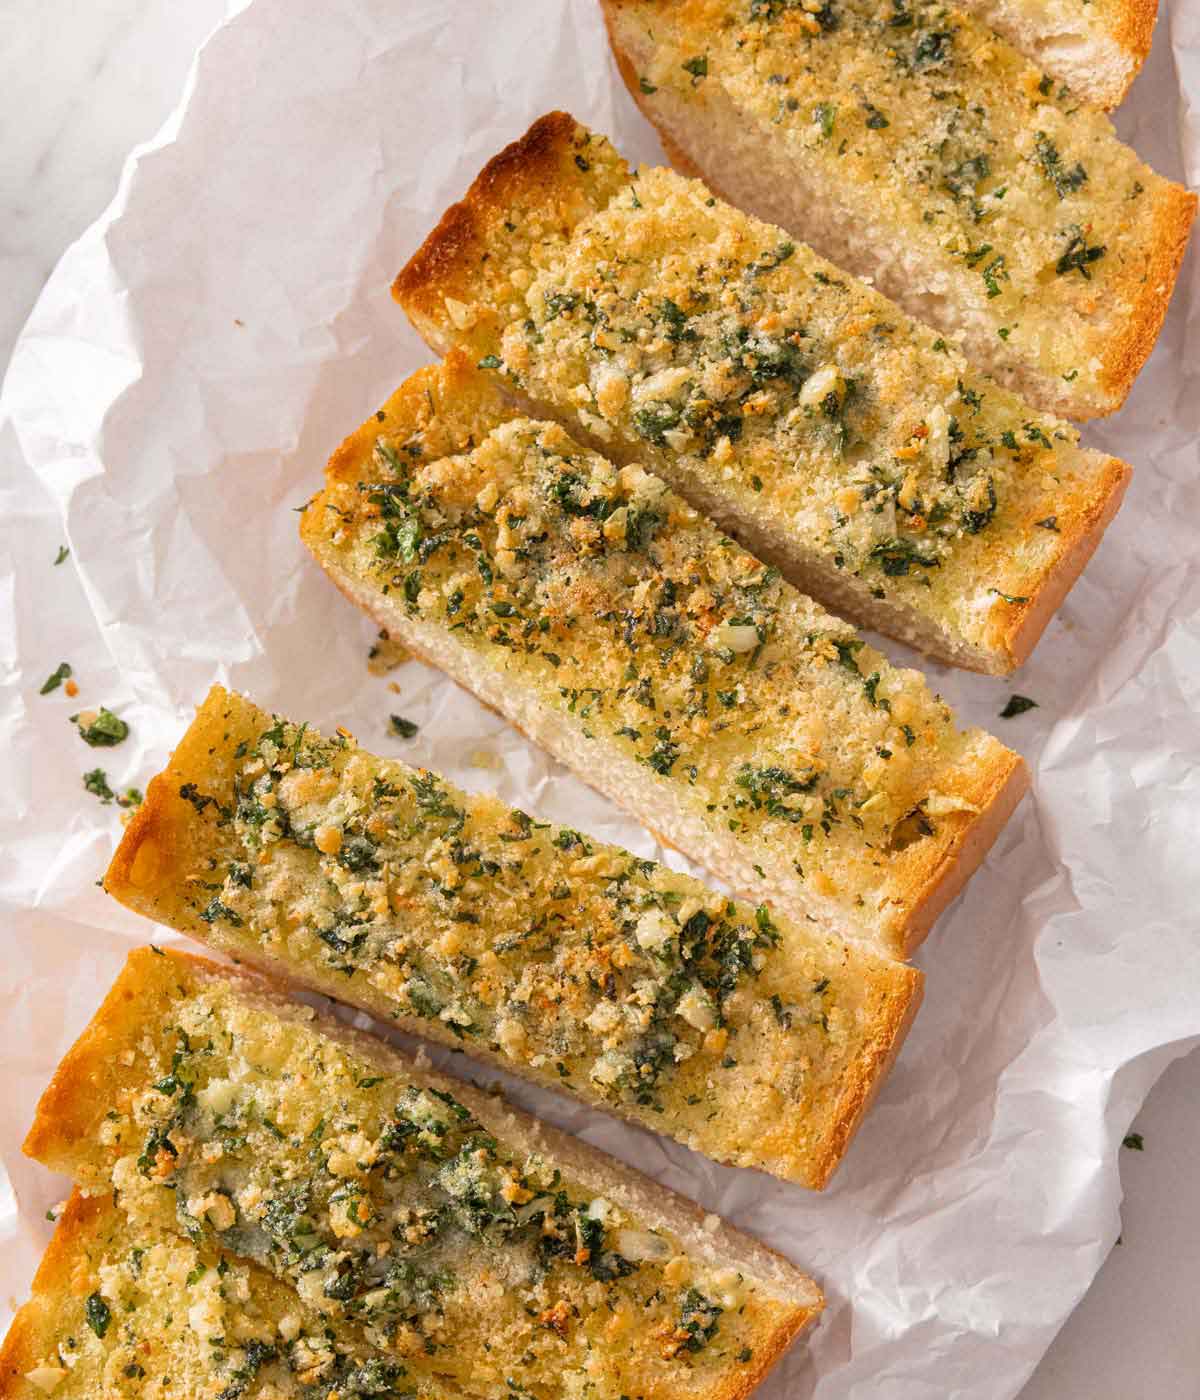 Overhead view of a loaf of garlic bread, cut into rectangles.